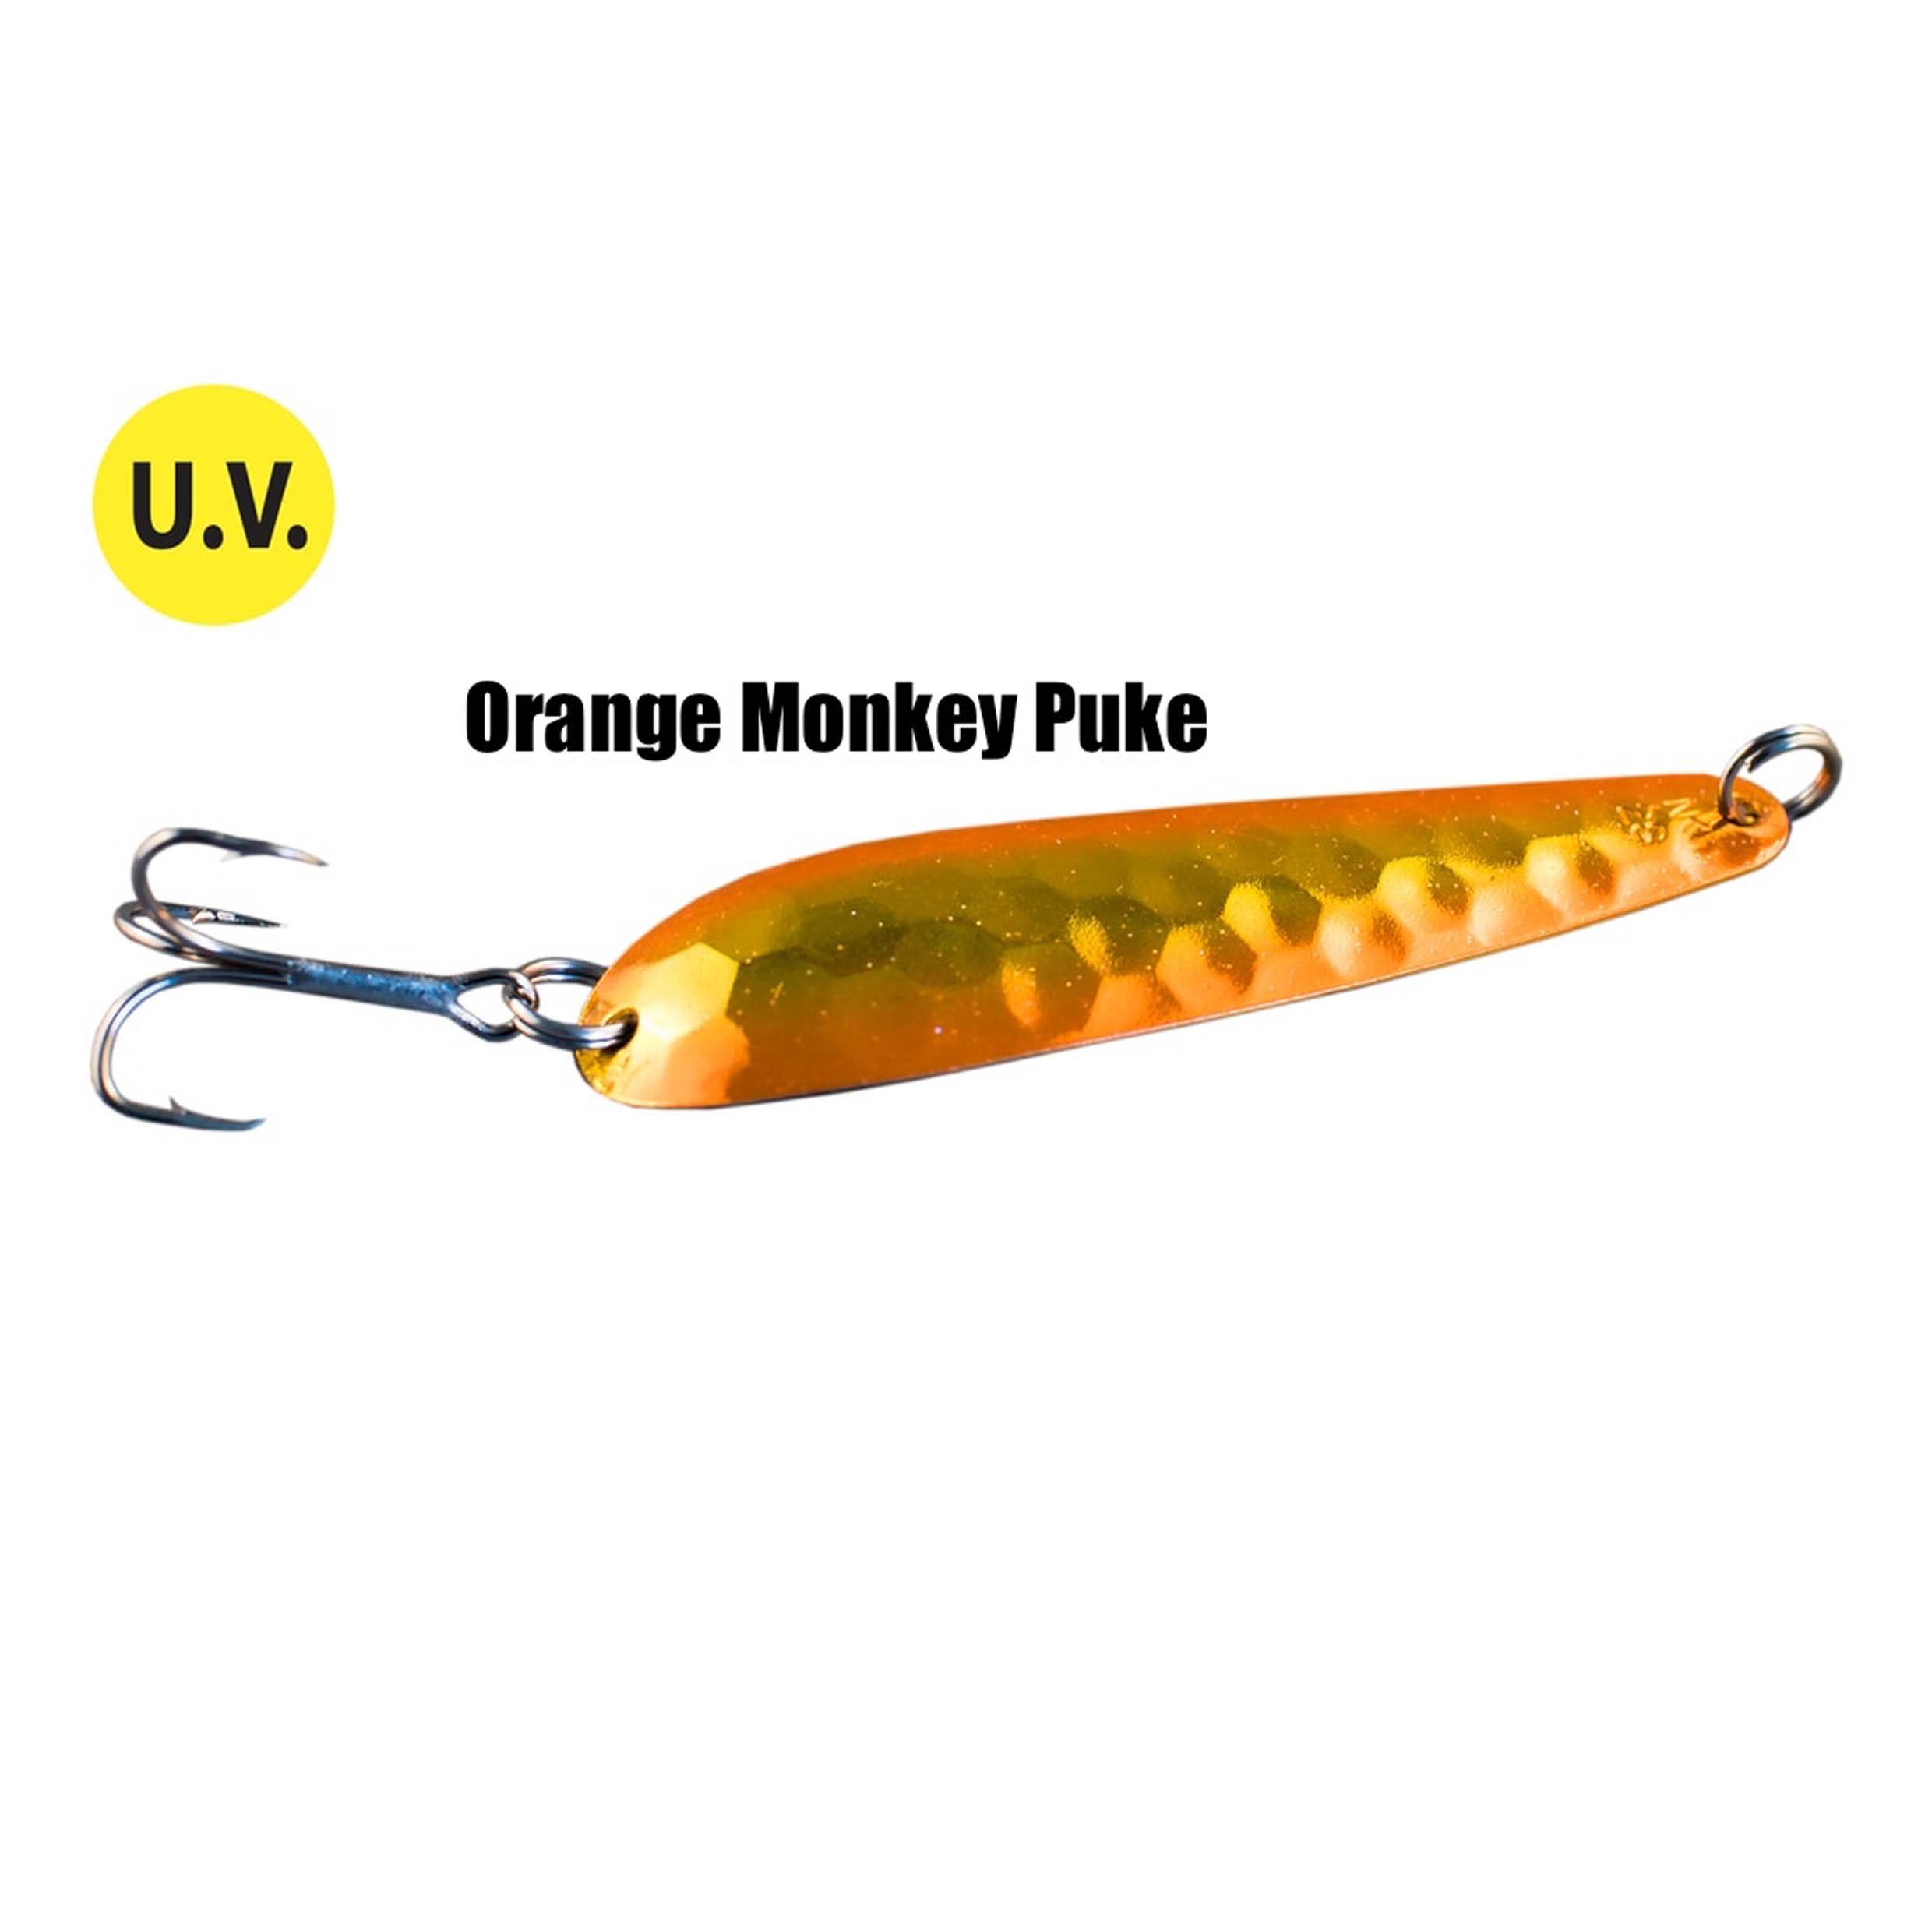 Northern King NK-MAG Spoon – Natural Sports - The Fishing Store